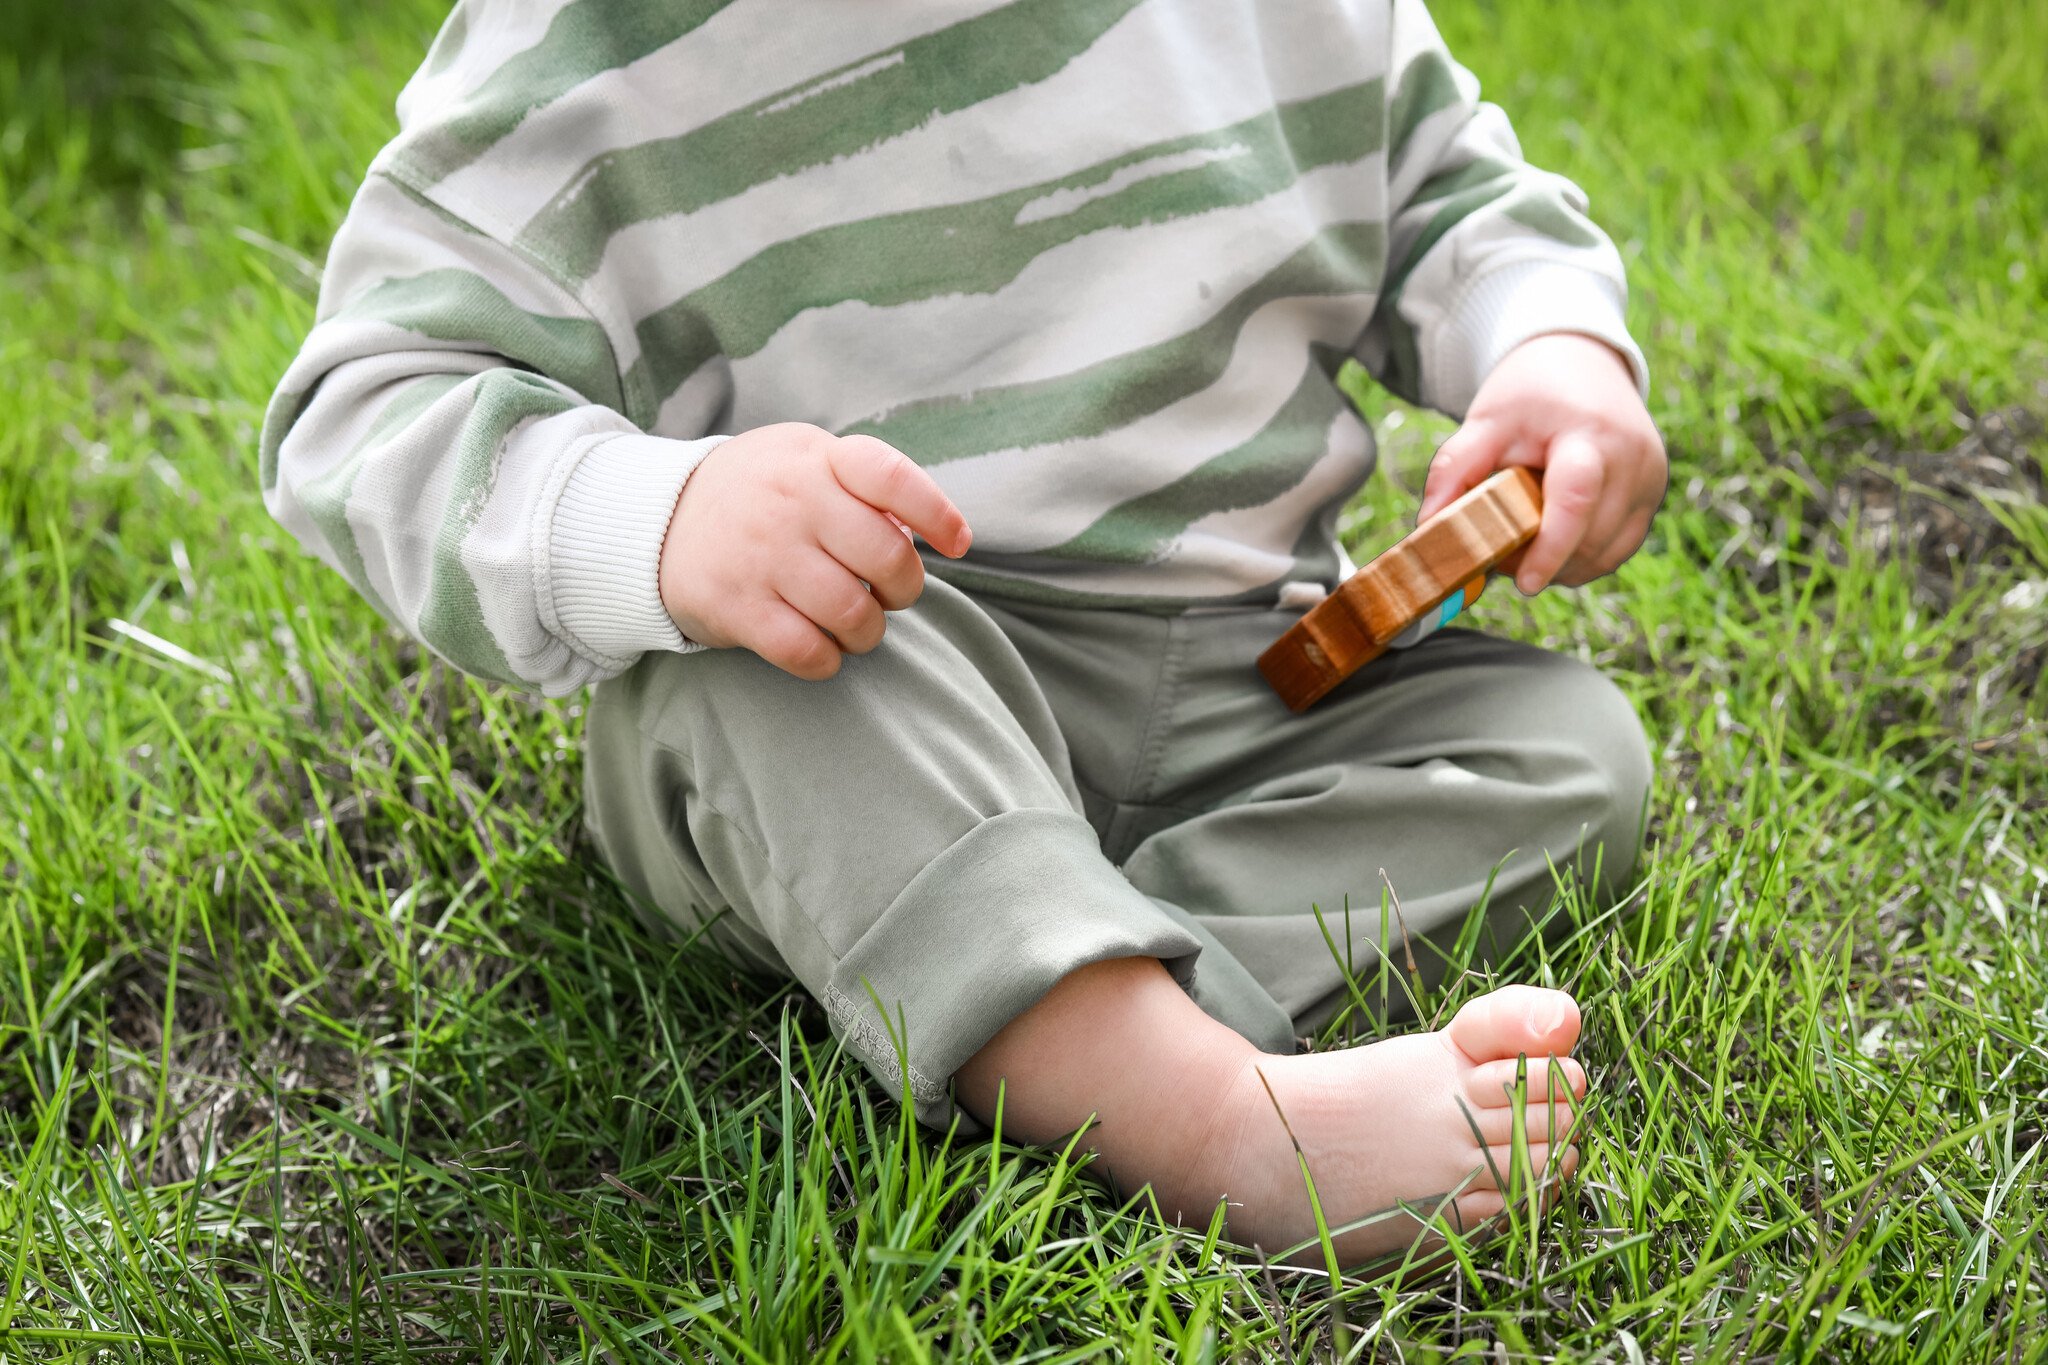 Celebrating Earth Day with Your Little Ones: 5 Fun and Meaningful Activities